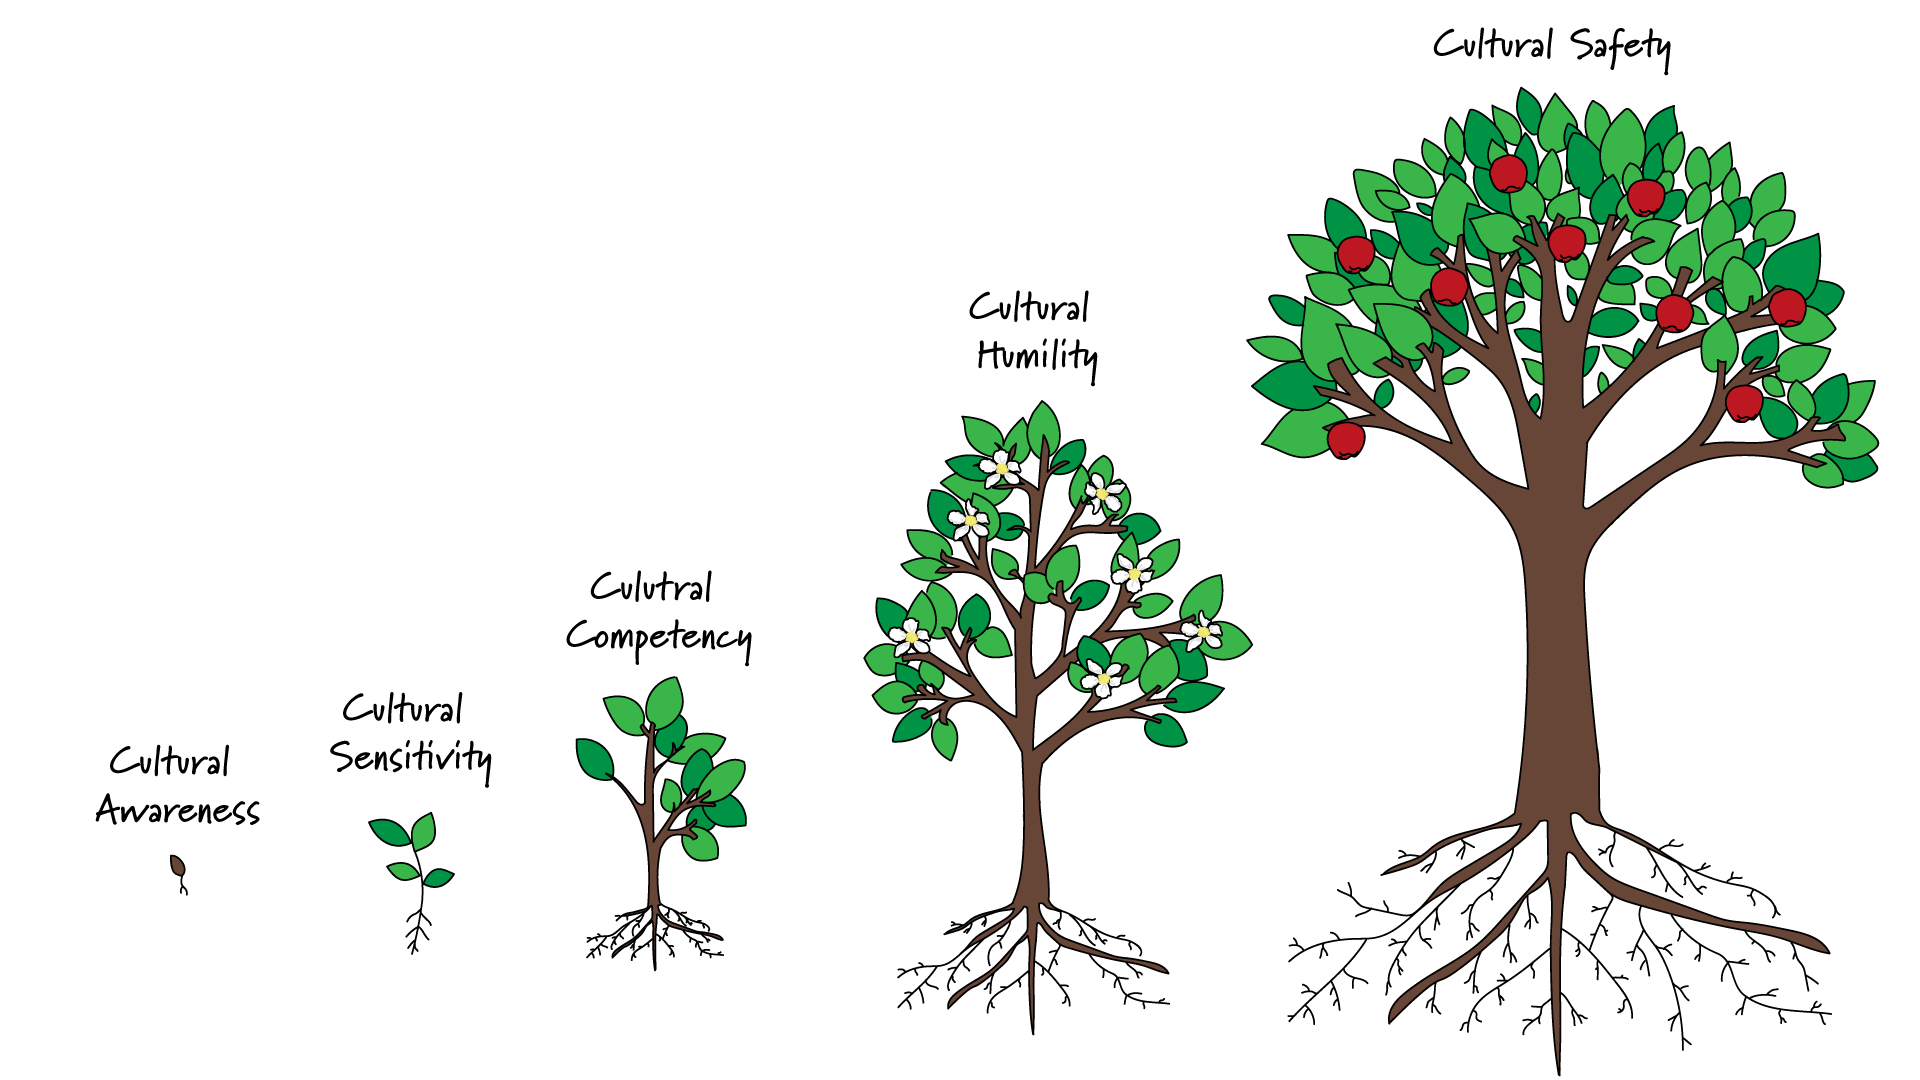 Stages of a tree growing from seed to an apple tree compared to cultural safety.